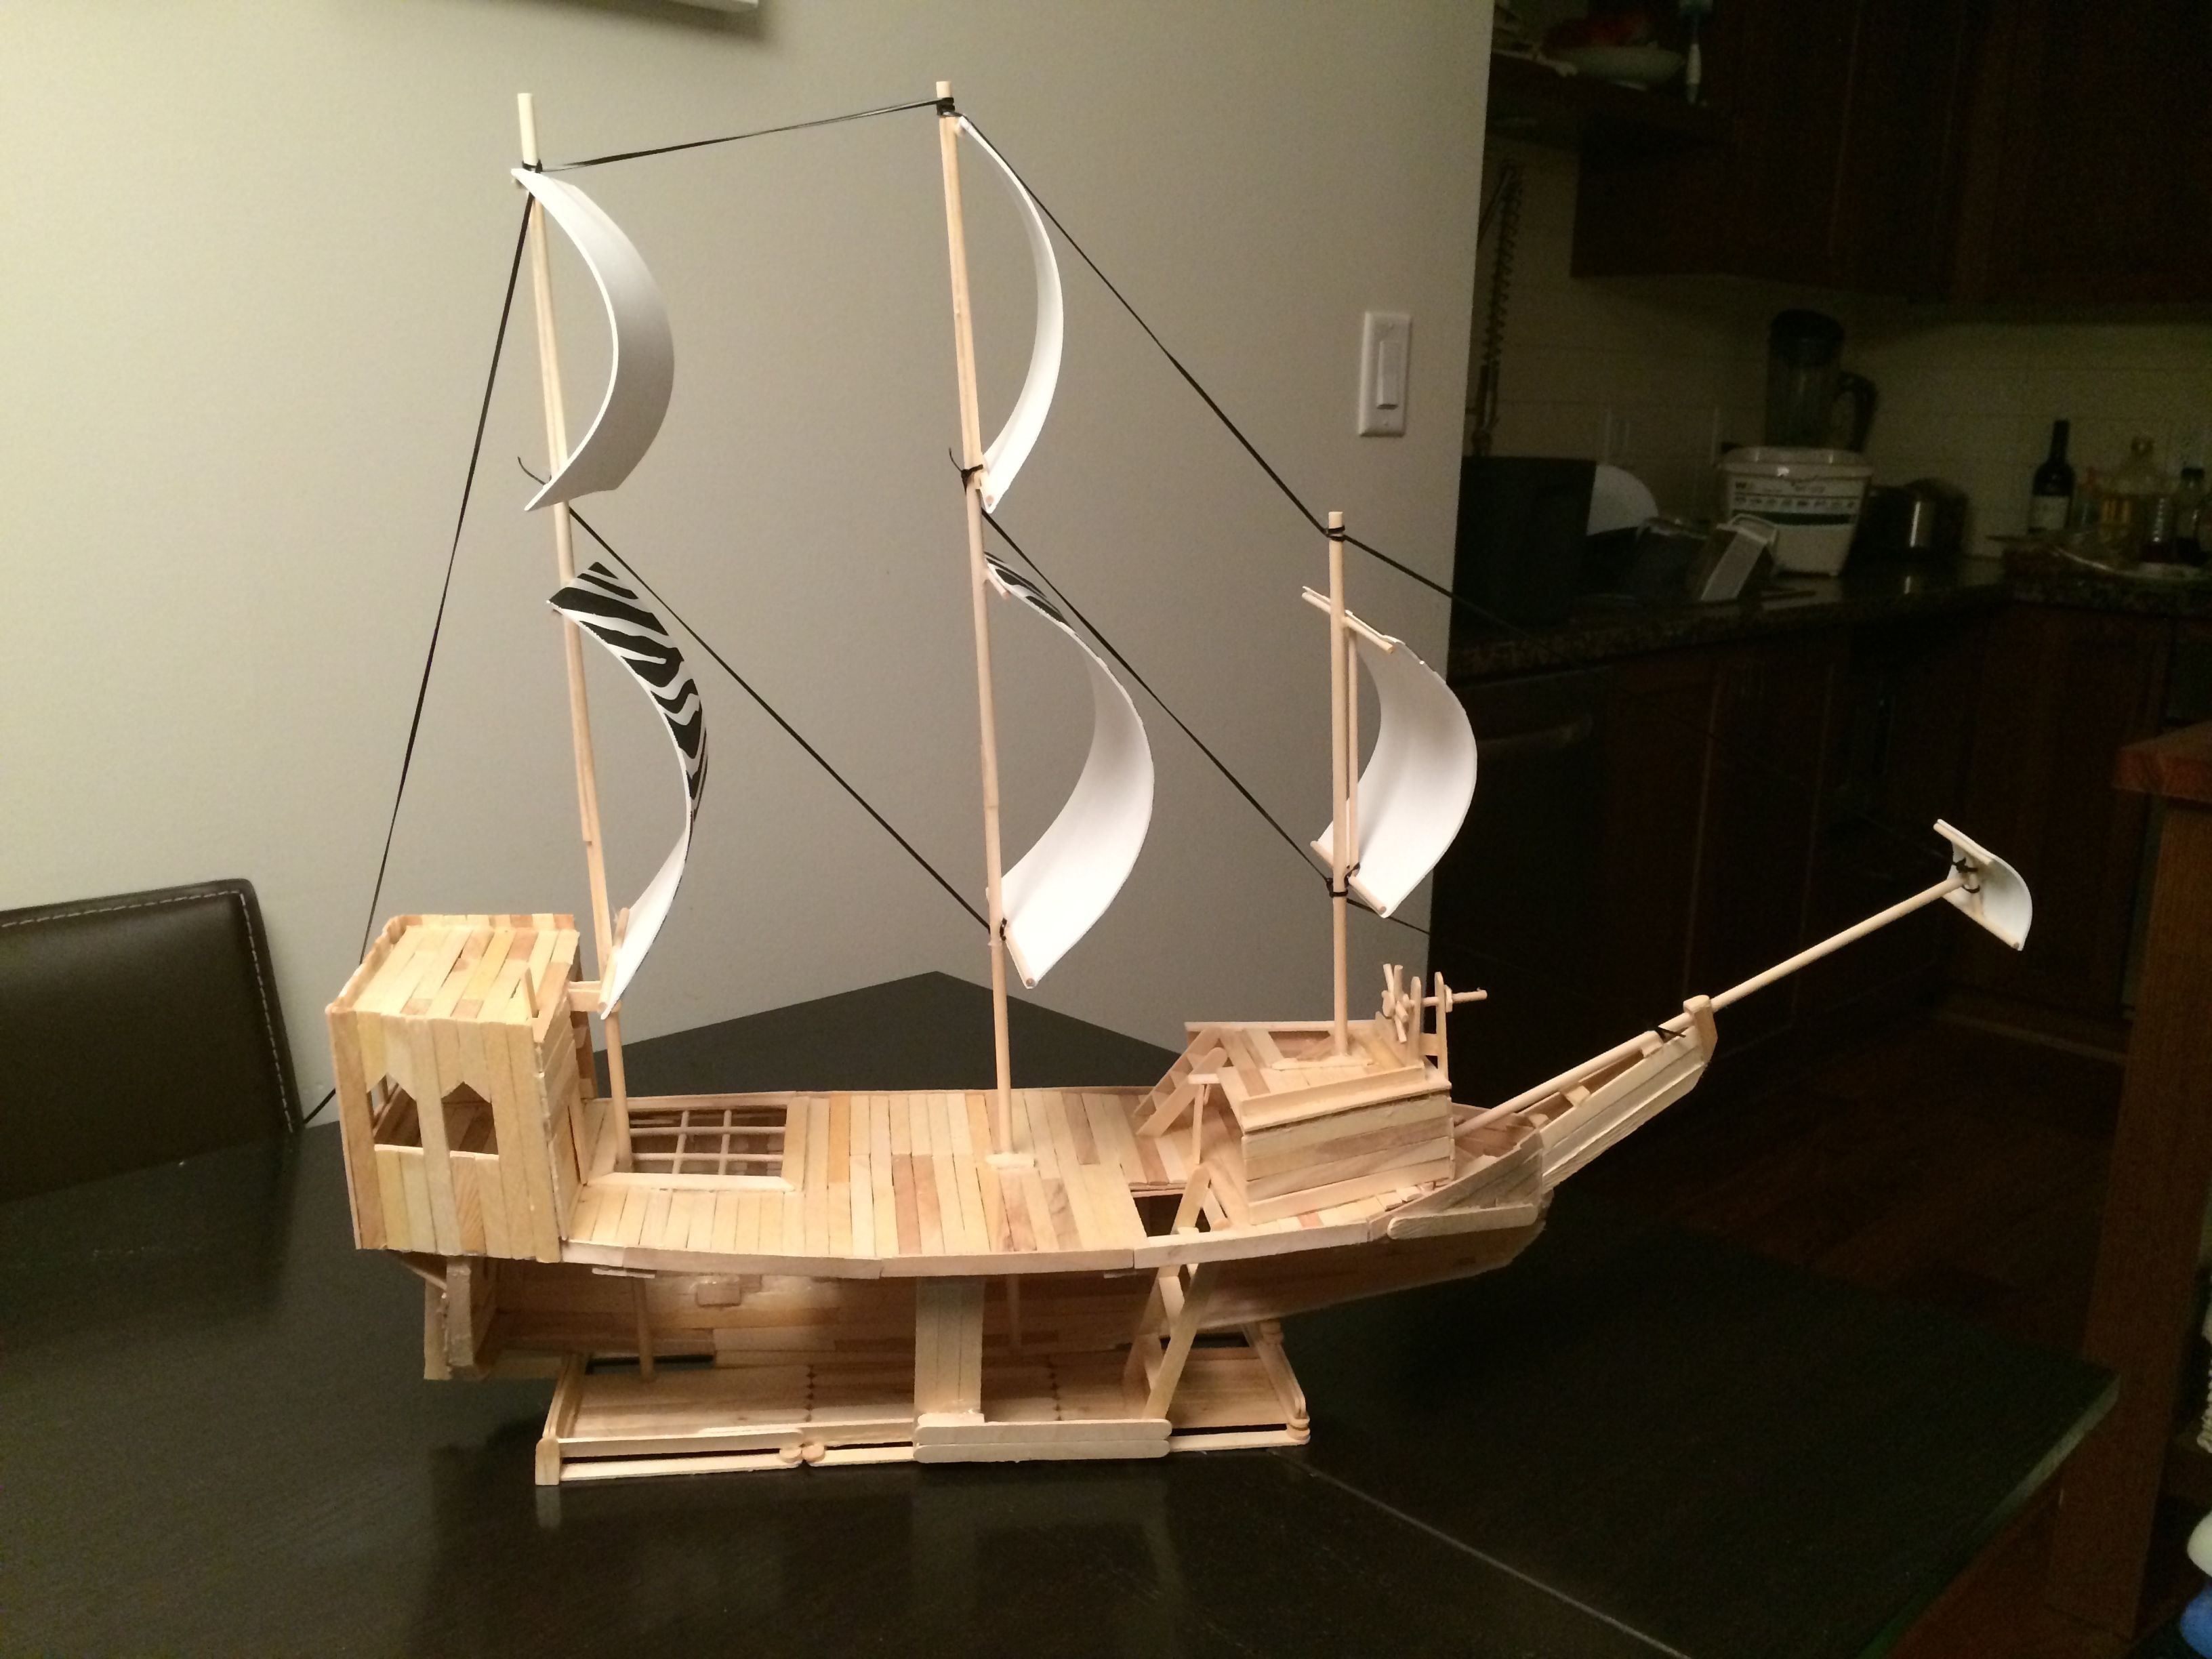 Pirate Ship Papercraft Angle 2 Pirate Ship Made Out Of Popsicle Sticks Wooden Dowels